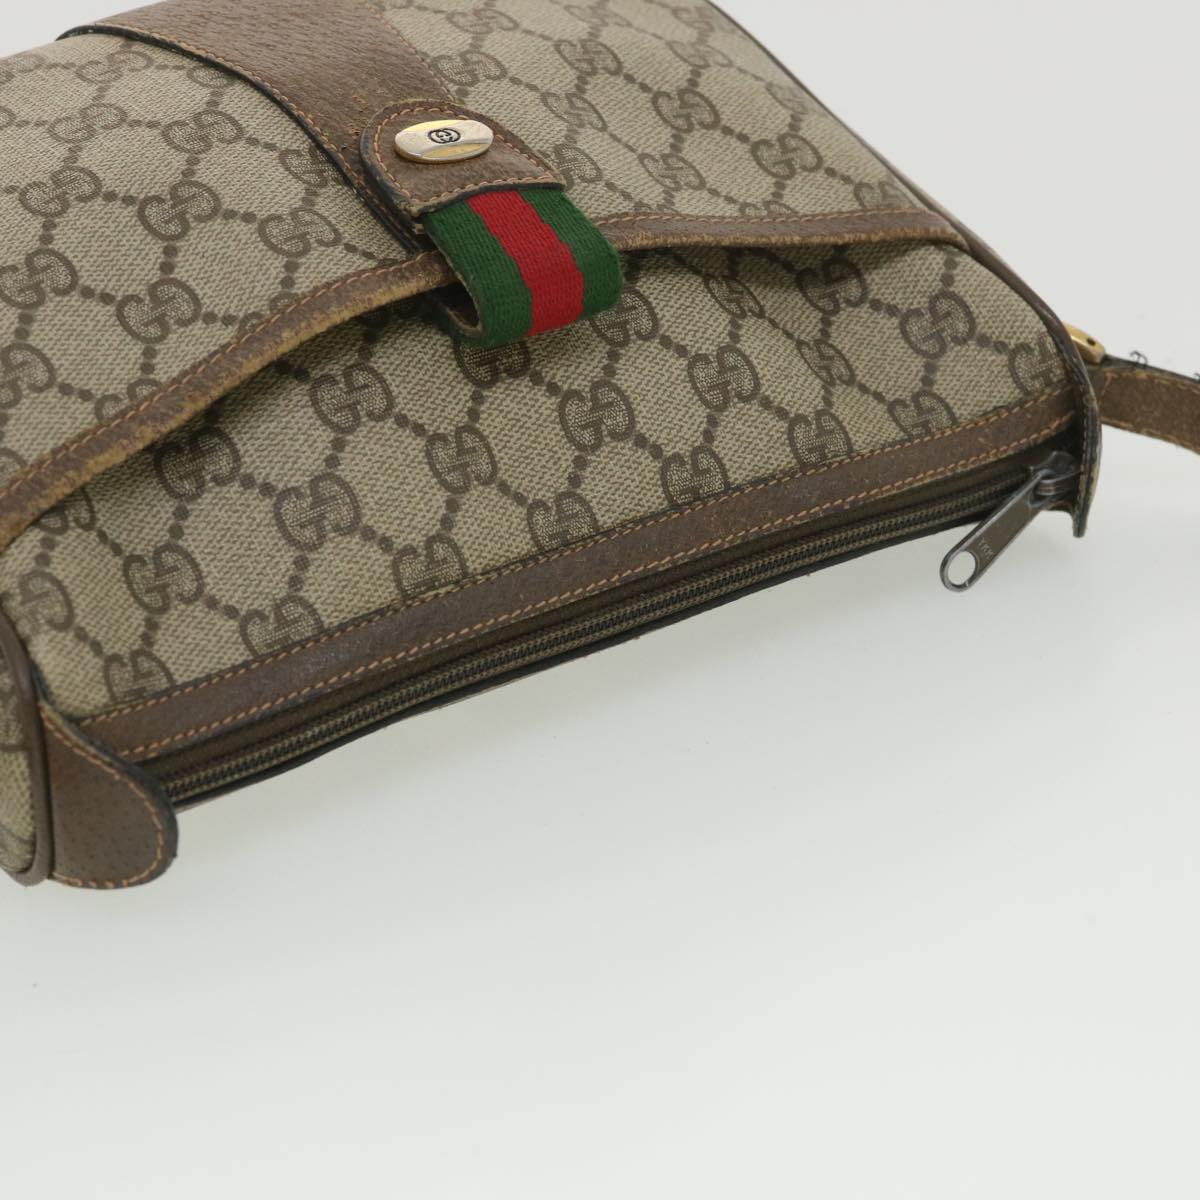 GUCCI GG Canvas Web Sherry Line Shoulder Bag Beige Red 89 02 032 Auth ro876